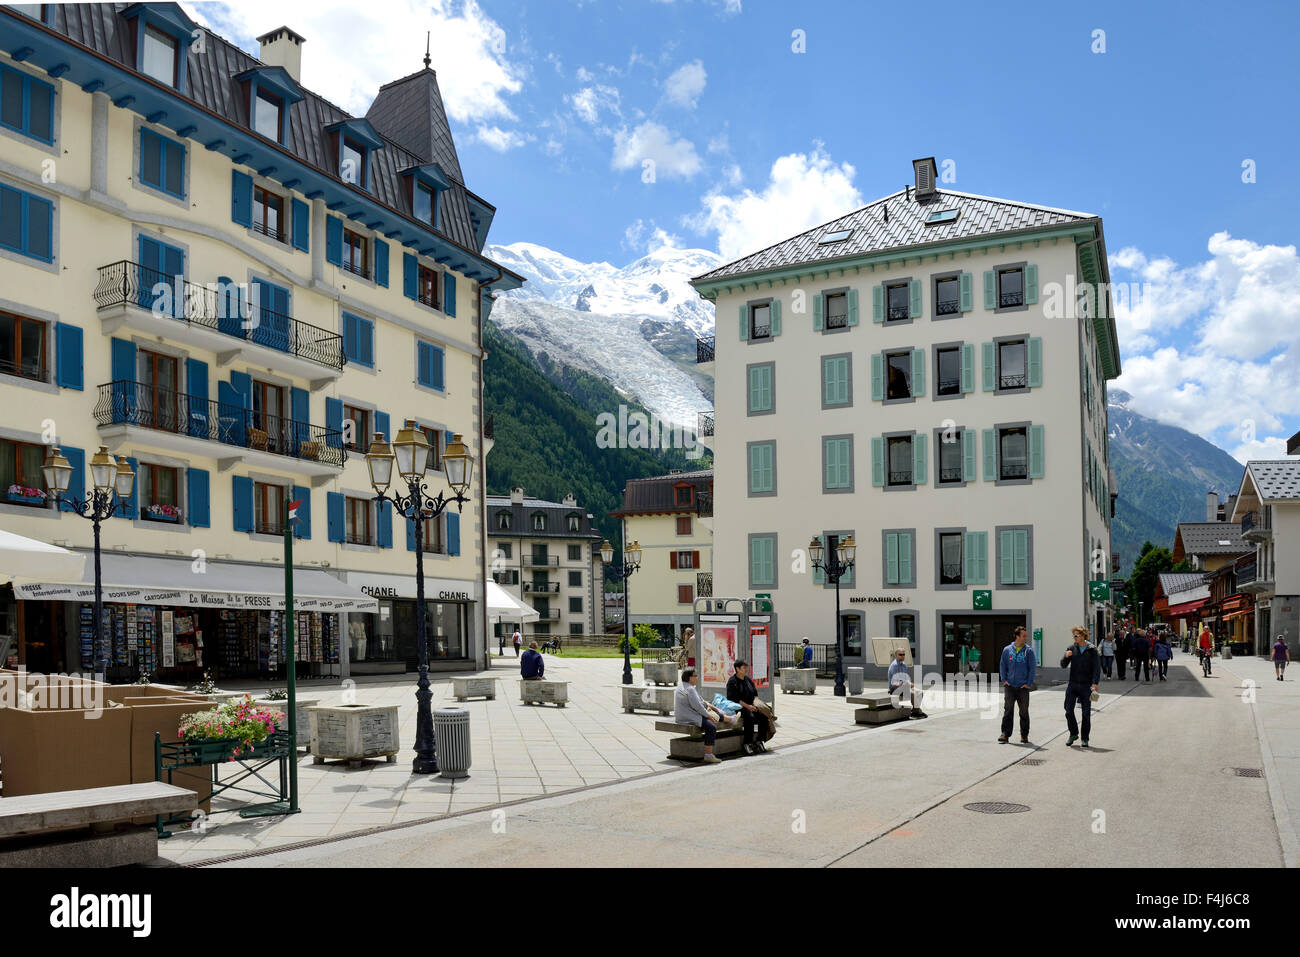 Hotel and shops, Chamonix Mont Blanc, French Alps, Haute Savoie, France, Europe Stock Photo